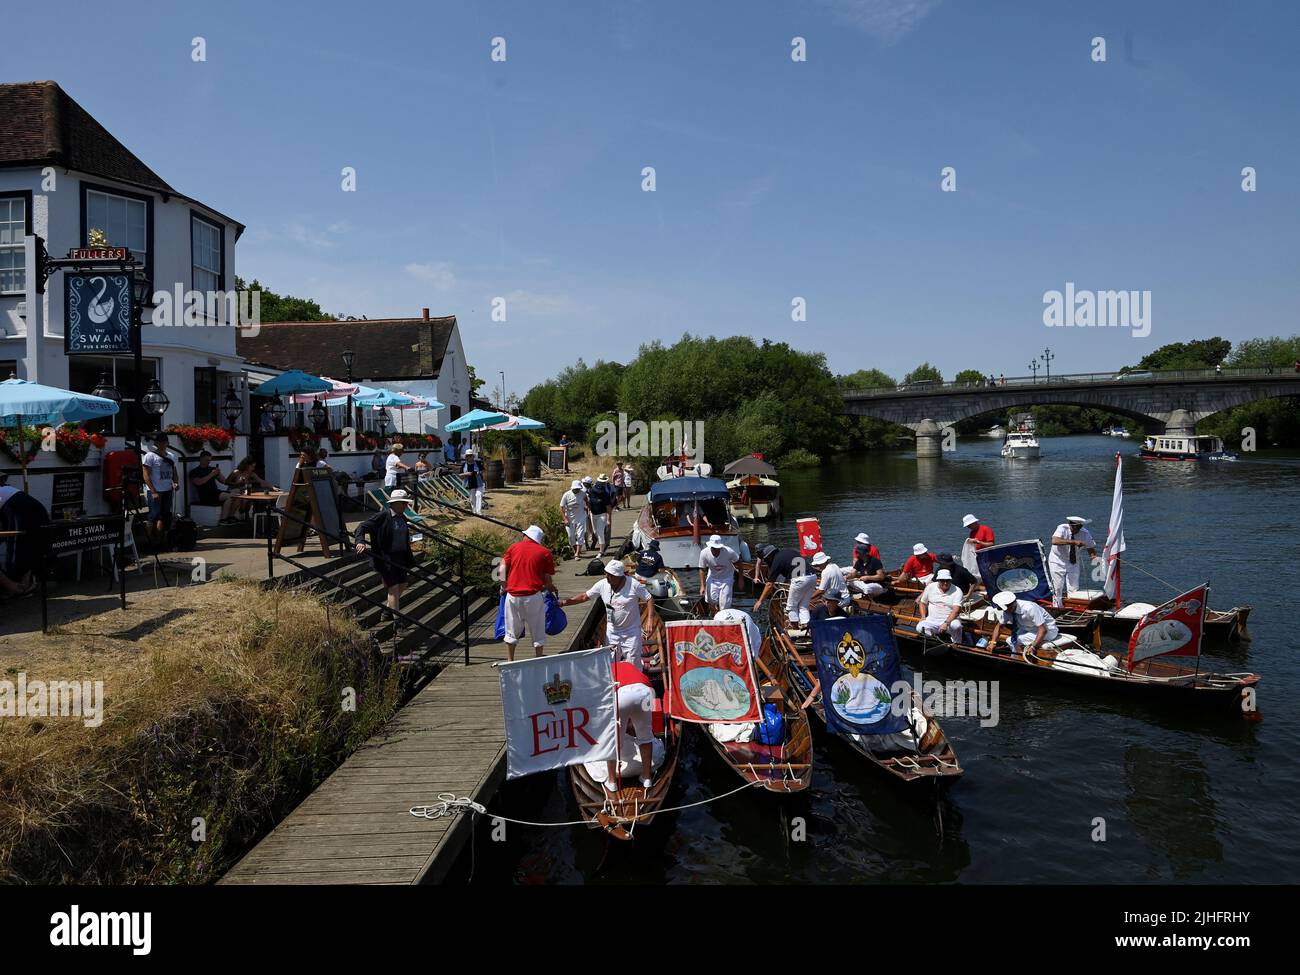 Swan Uppers moor their boats to take a break at The Swan pub during the annual census of the swan population along sections of the River Thames, Shepperton near Windsor, Britain, July 18, 2022. REUTERS/Toby Melville Stock Photo